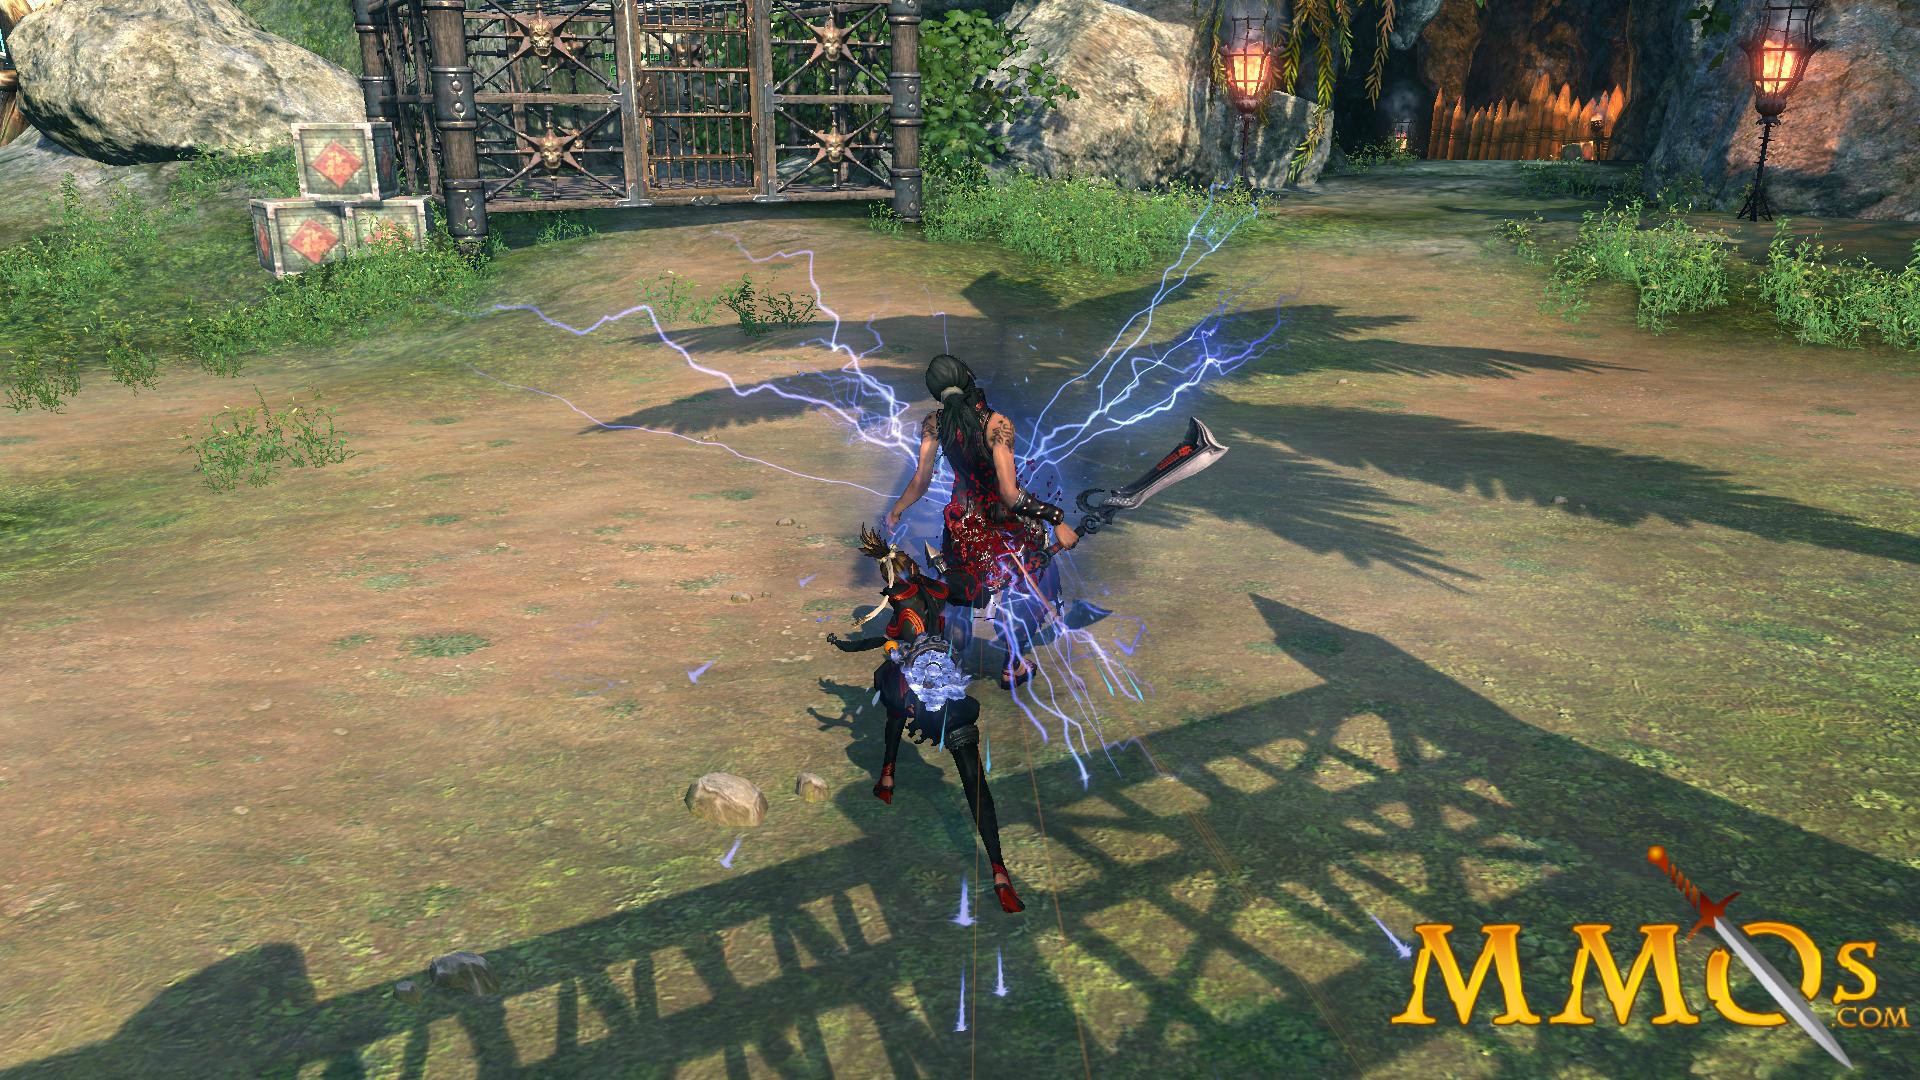 blade and soul online on steam